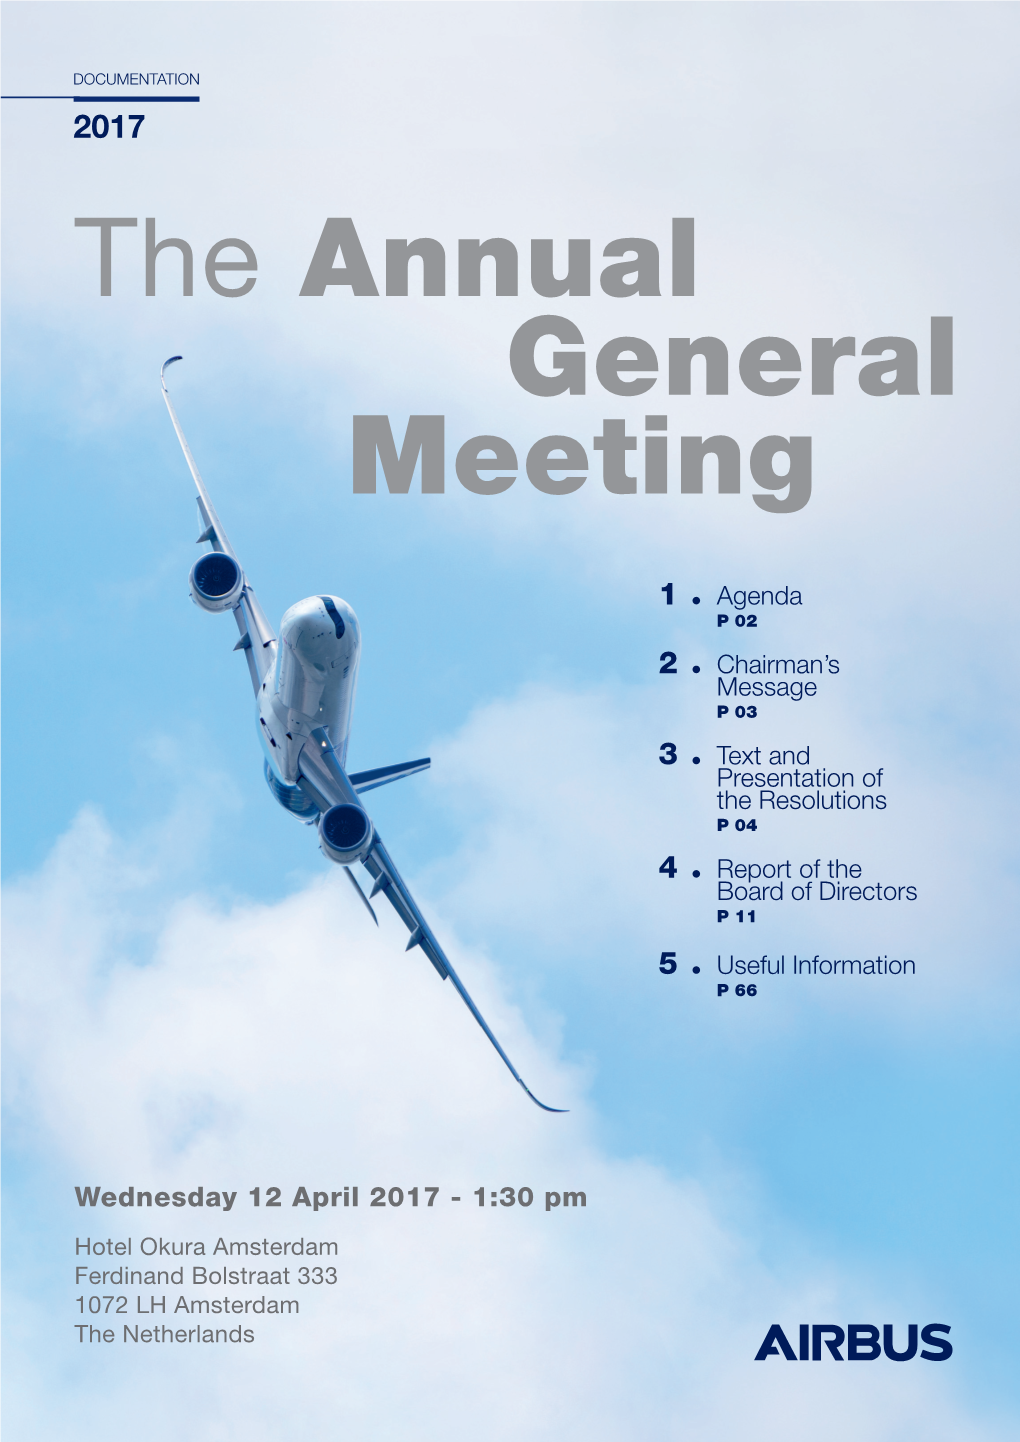 General Meeting the Annual